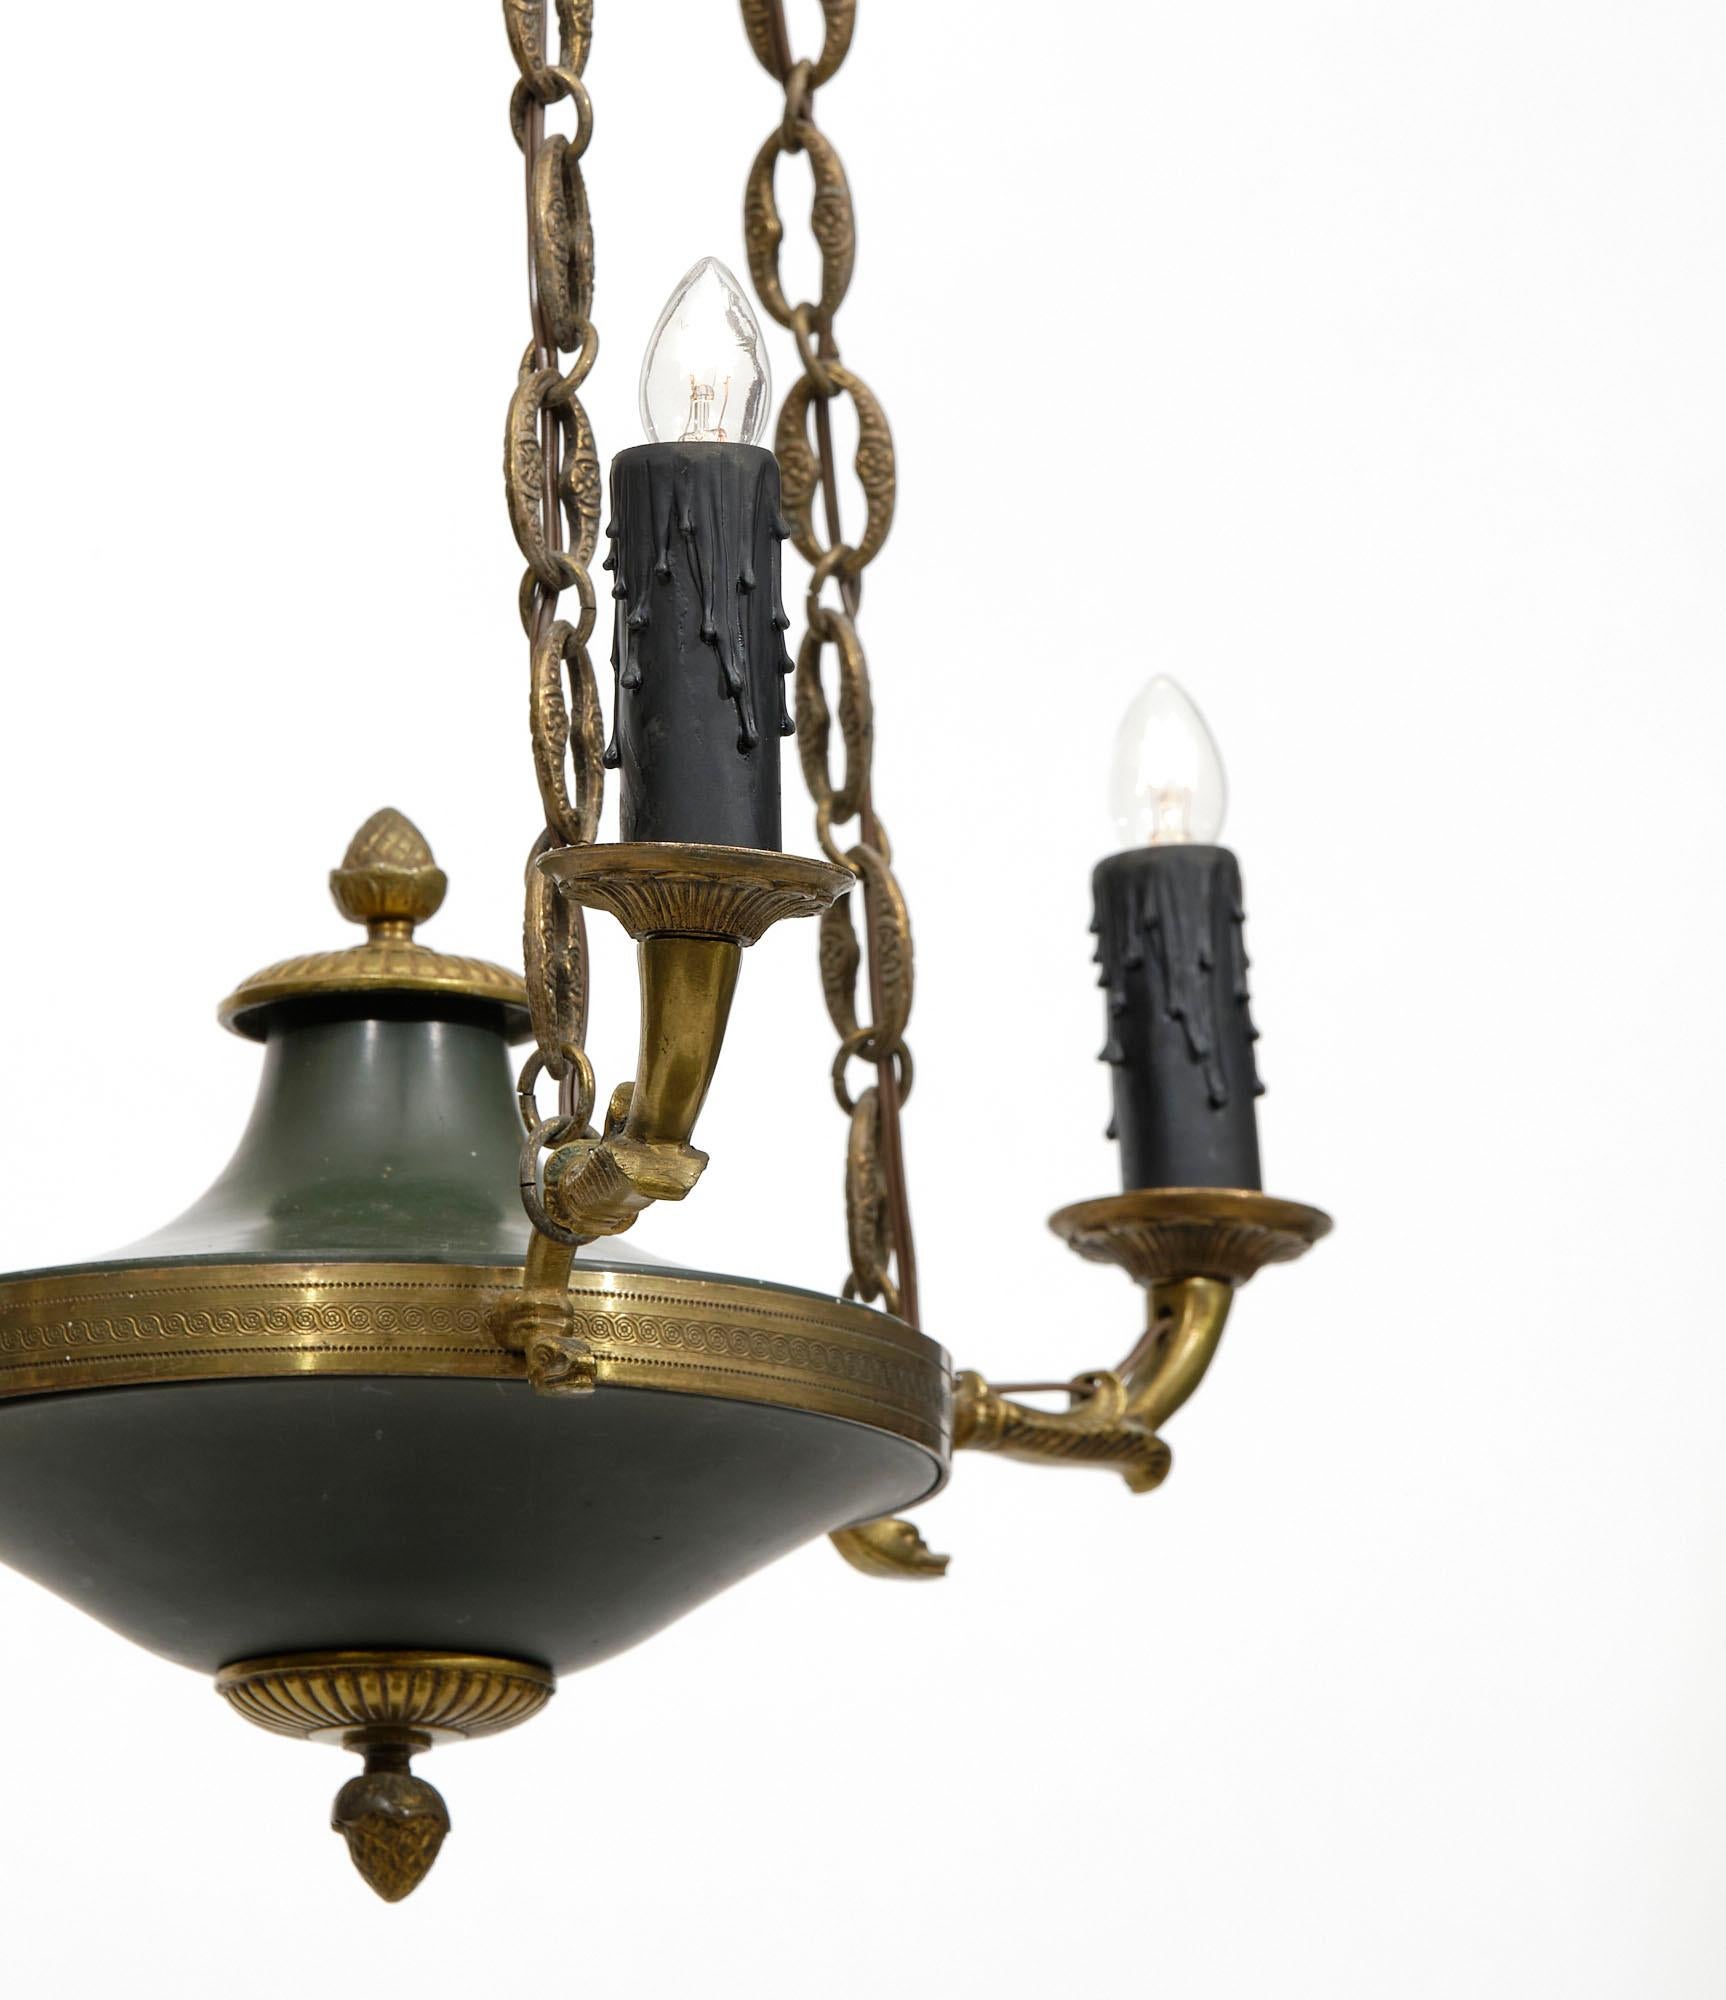 Chandelier from France in the Empire style. This refined fixture features three arms of the finest gilt bronze case with an acorn finial and original chains and canopy. It has been newly wired to fit US standards.